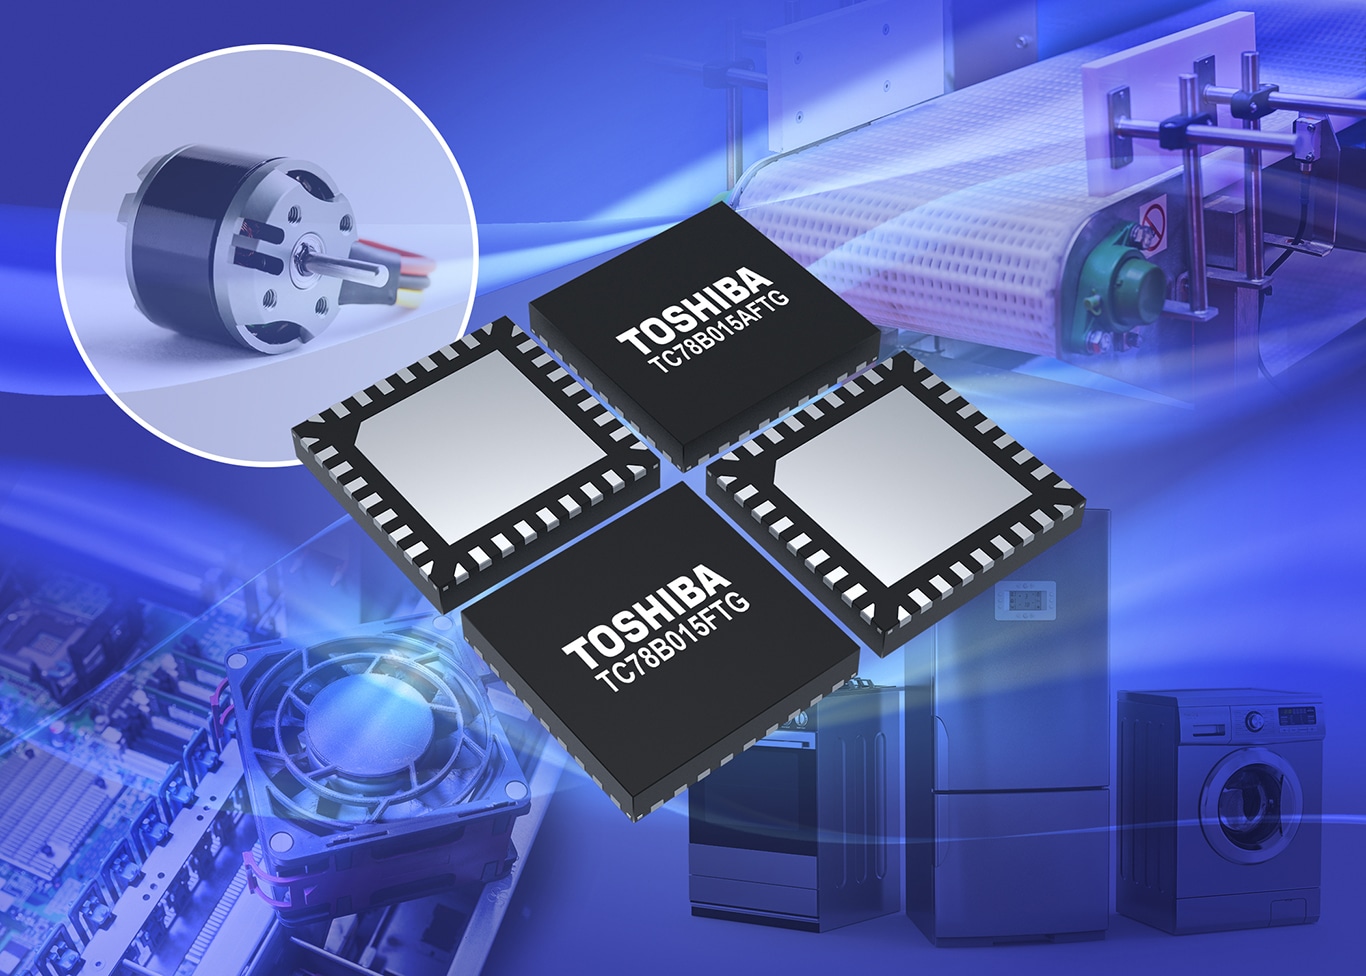 Toshiba’s New Three-phase Brushless Motor Drivers Realise High Speed Rotation for Small Motors